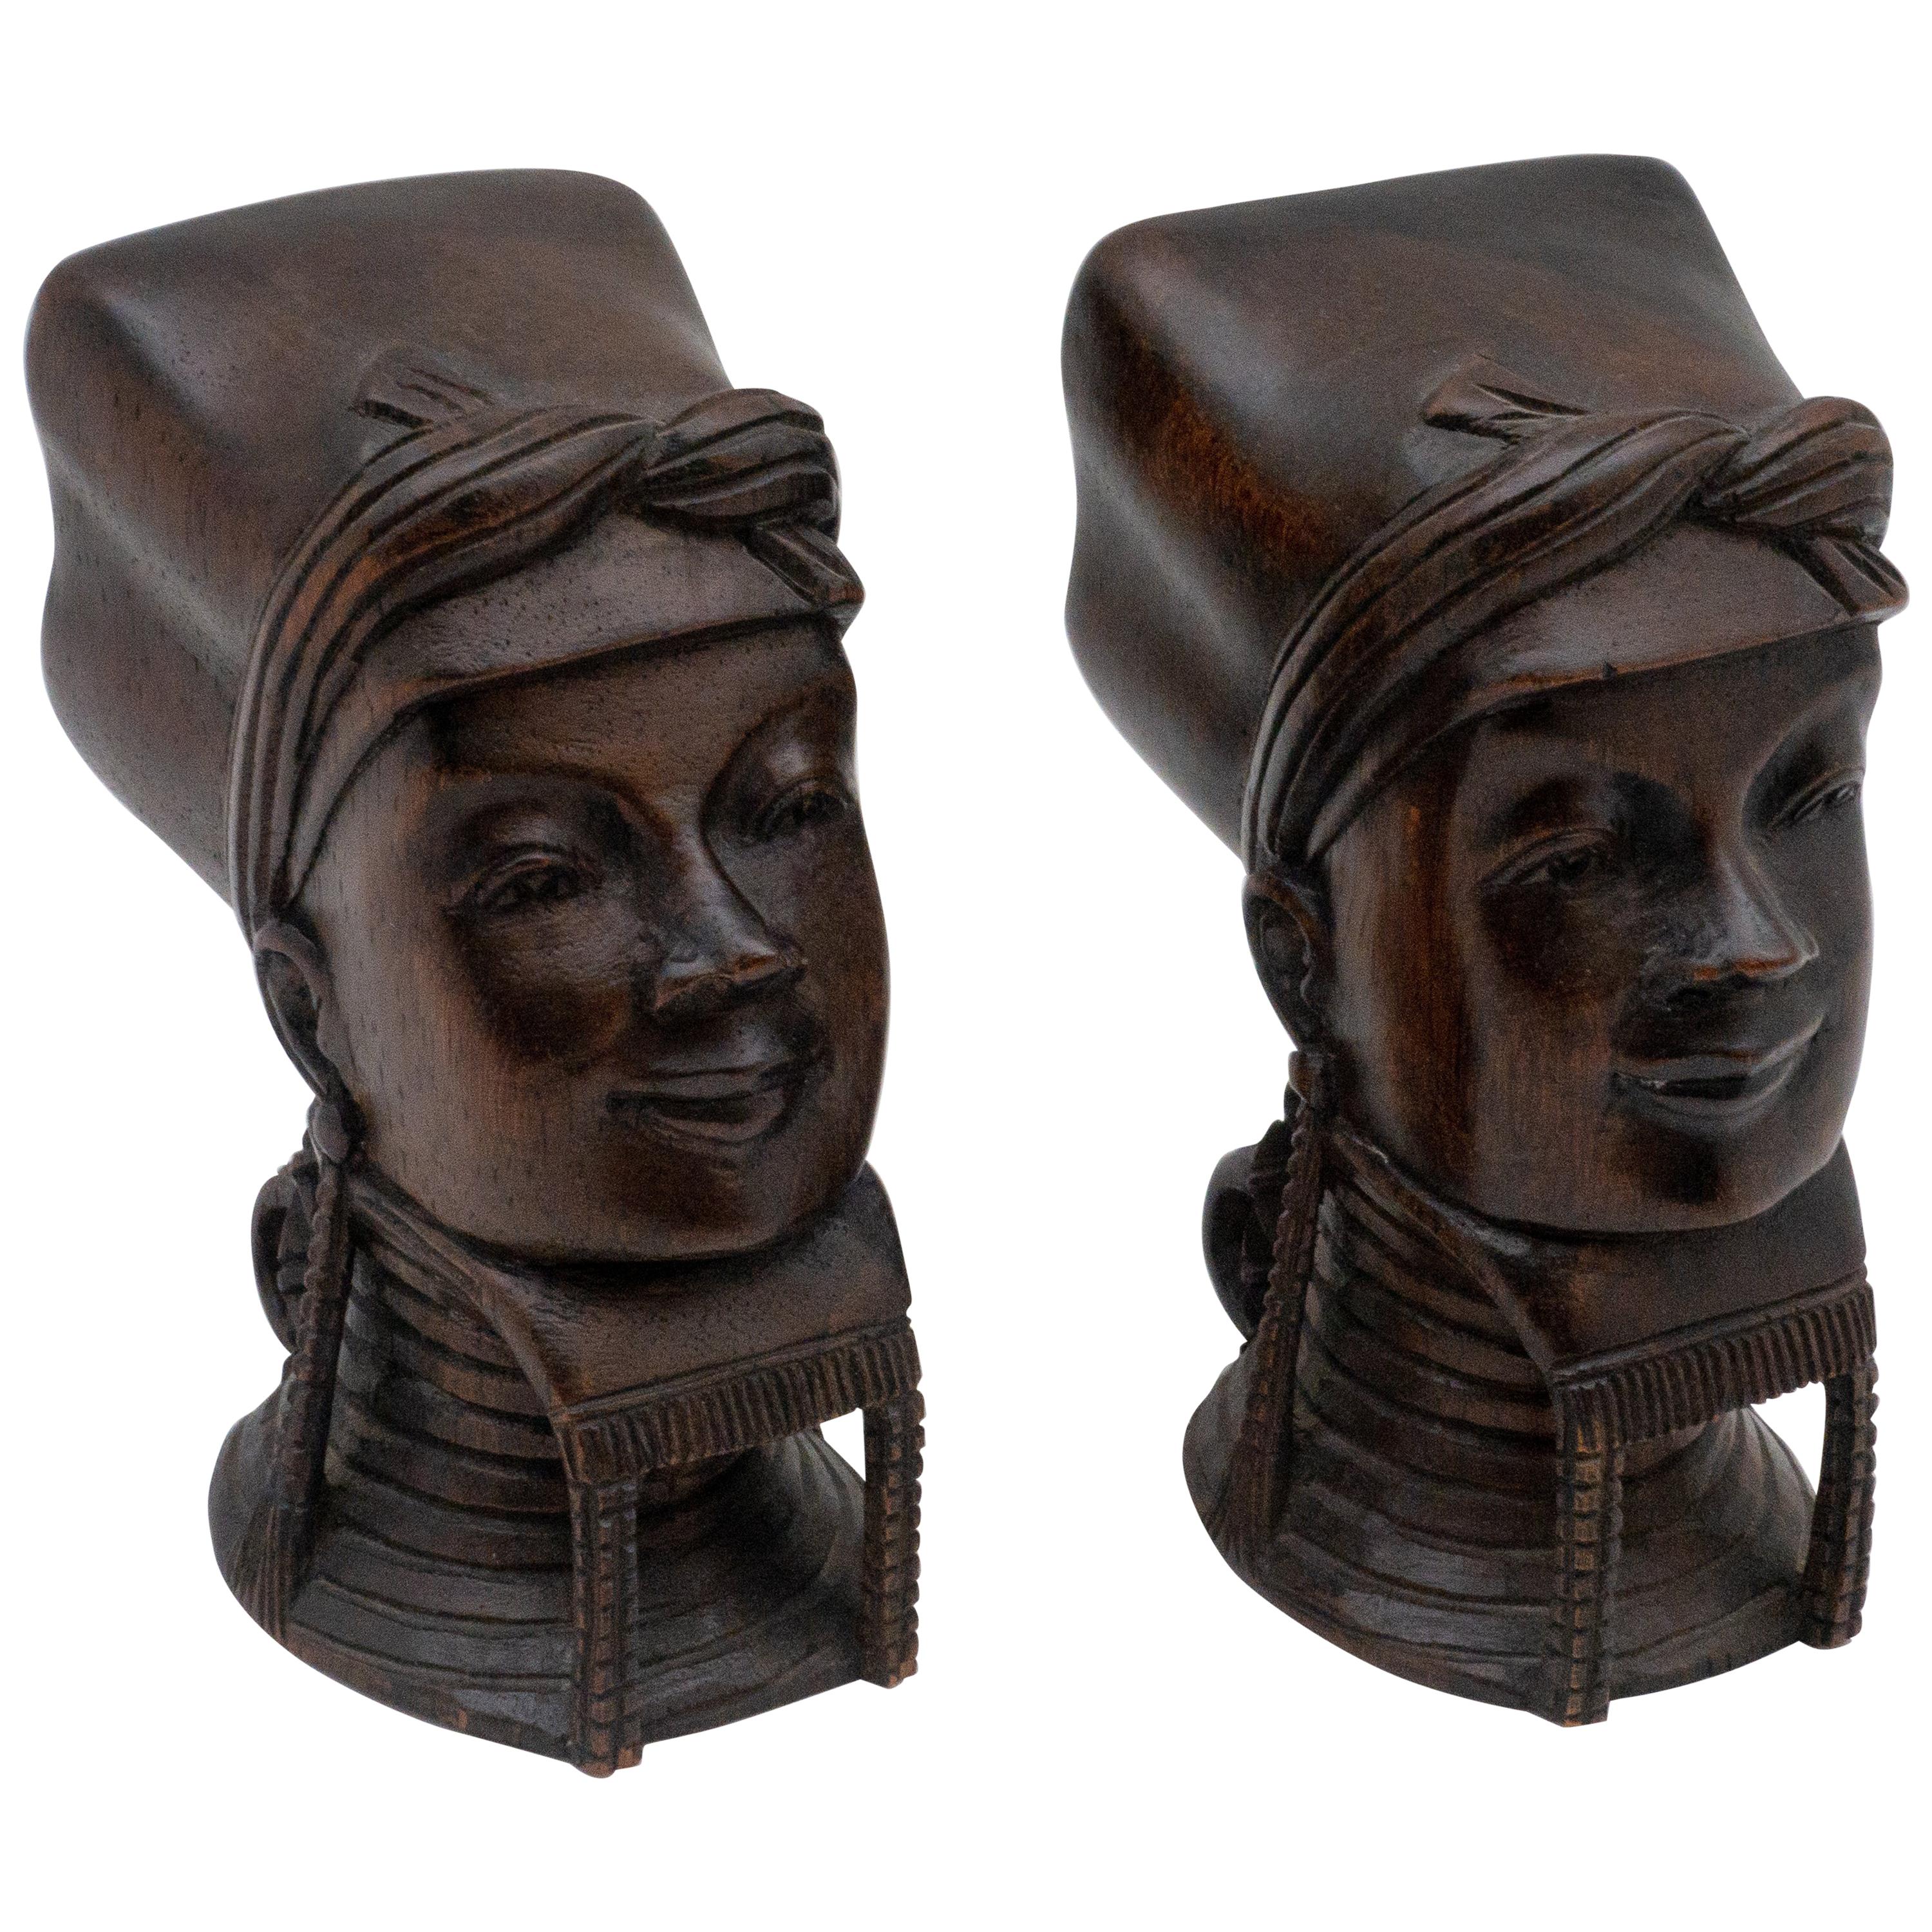 Pair of Burmese Wooden Bookends or Busts